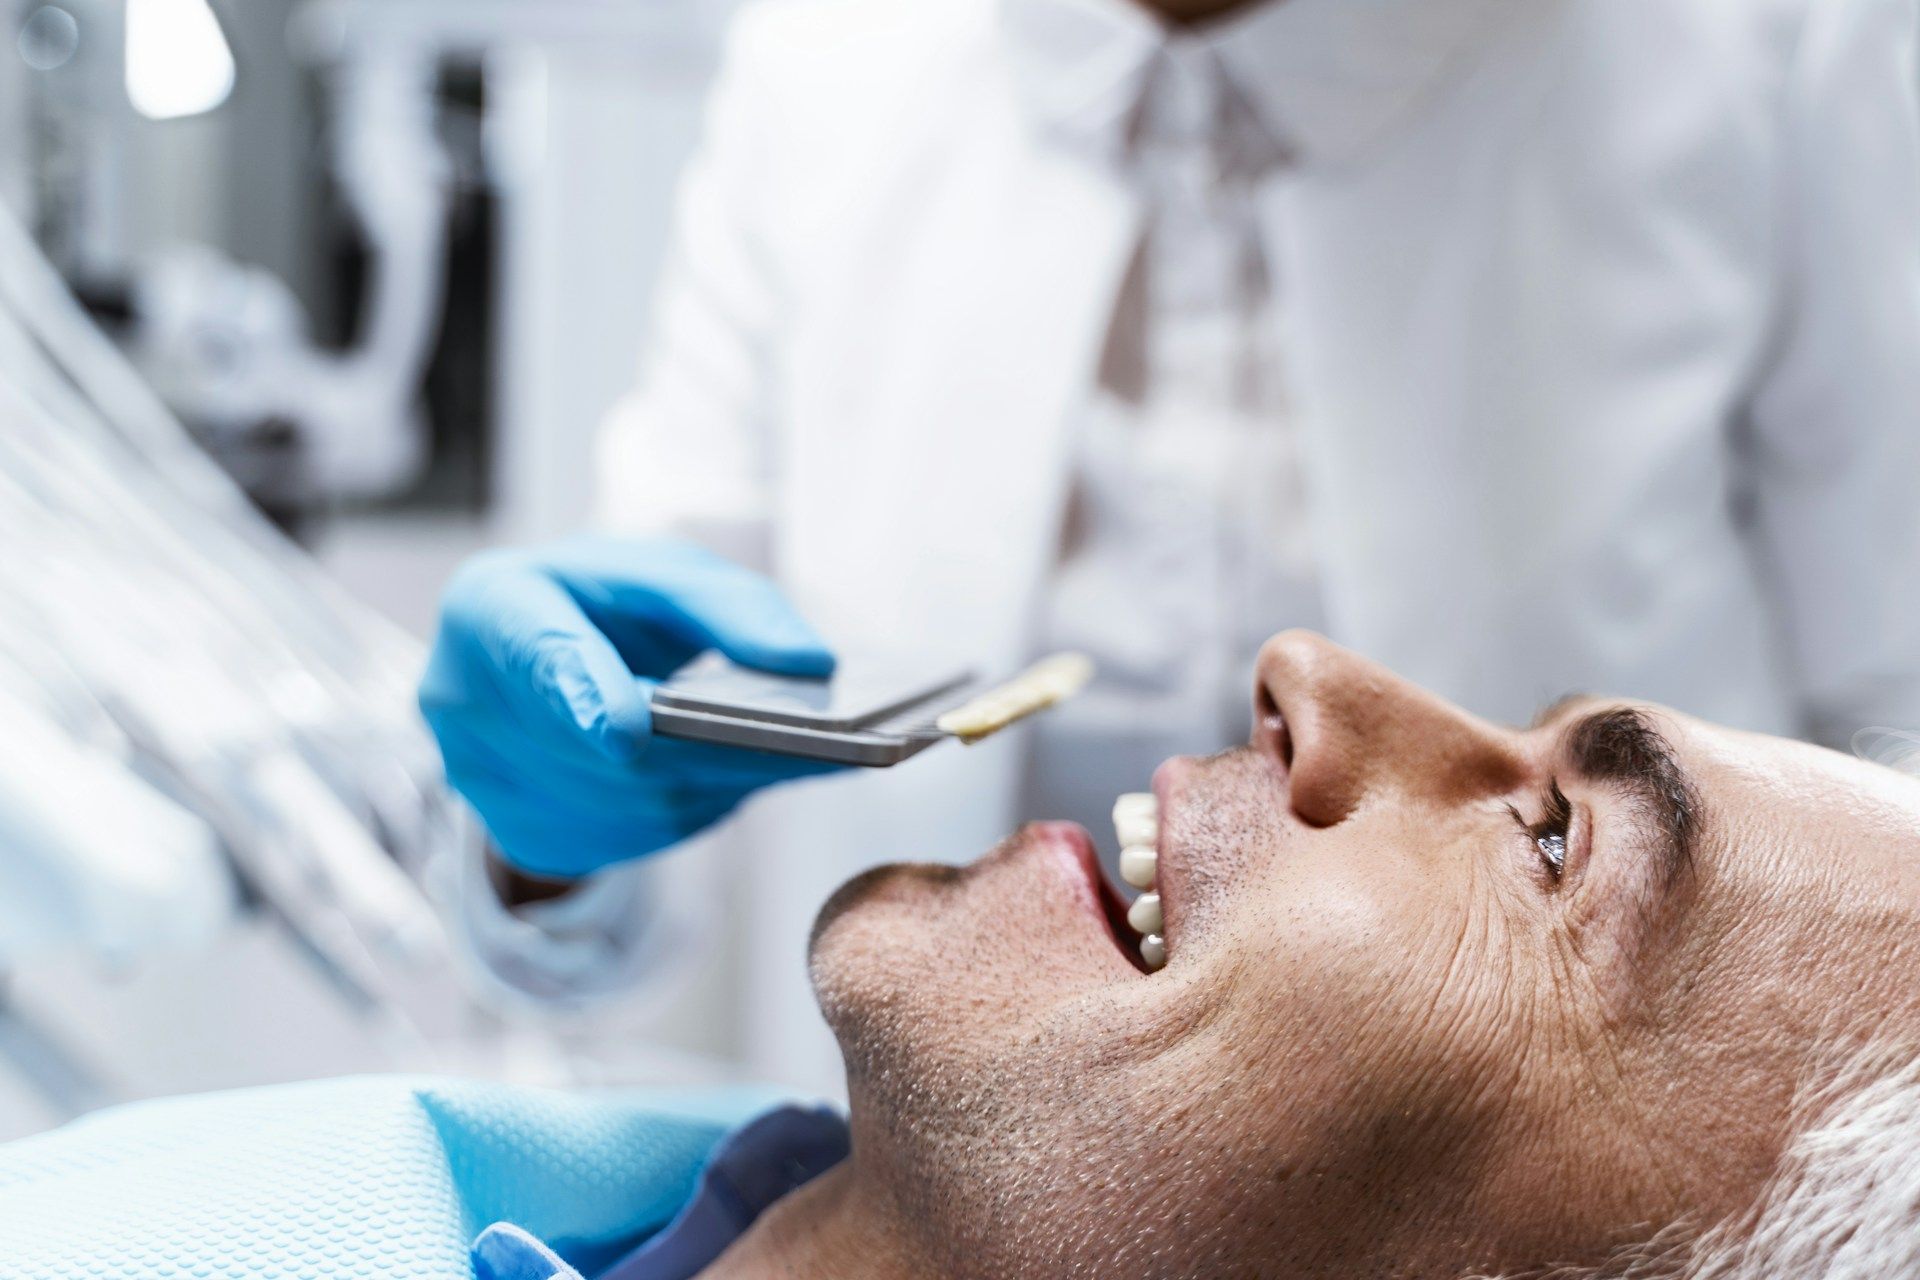 A man is laying in a dental chair while a dentist examines his teeth.